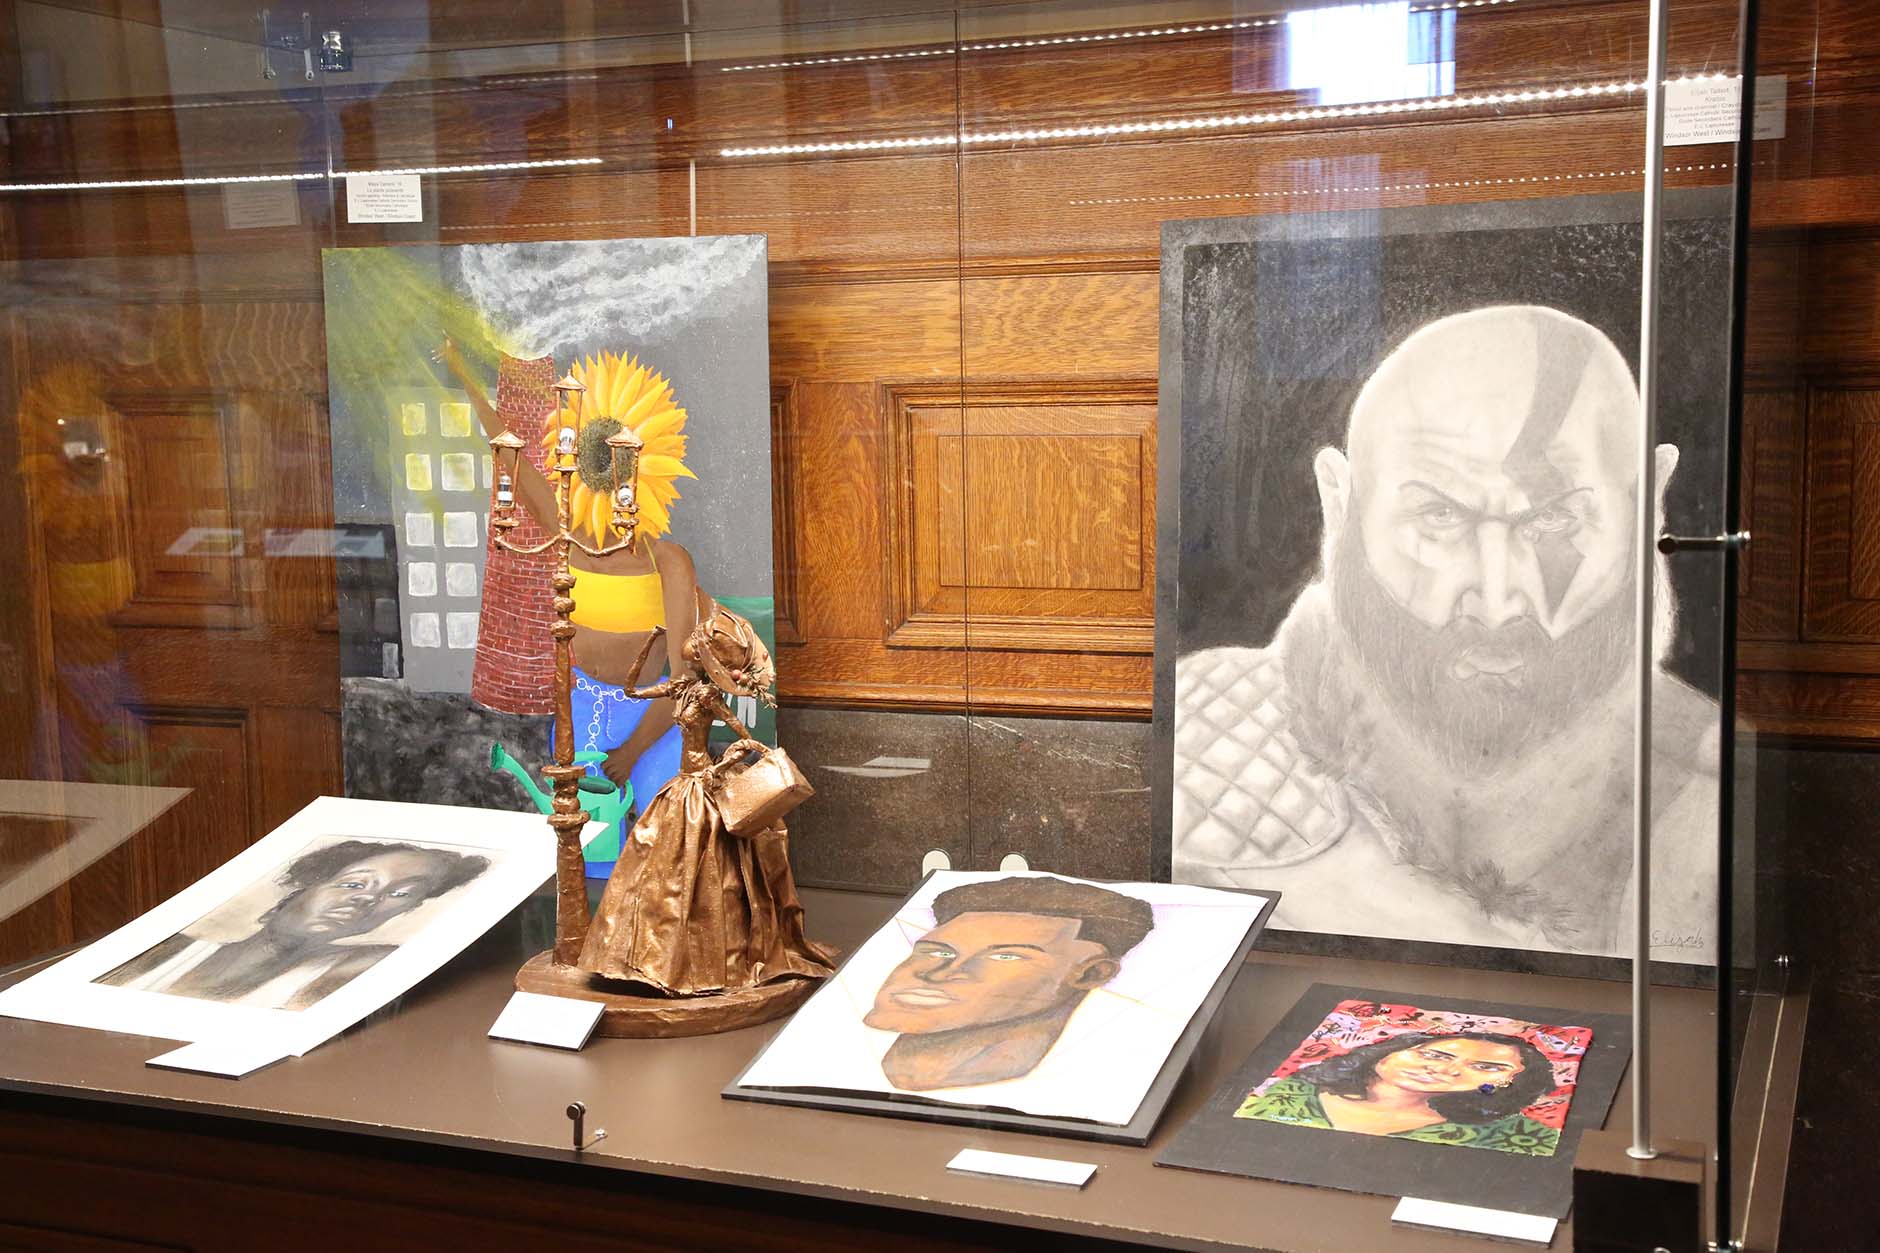 Paintings, drawings and a sculpture by student artists in the 2020 Youth Arts Program.